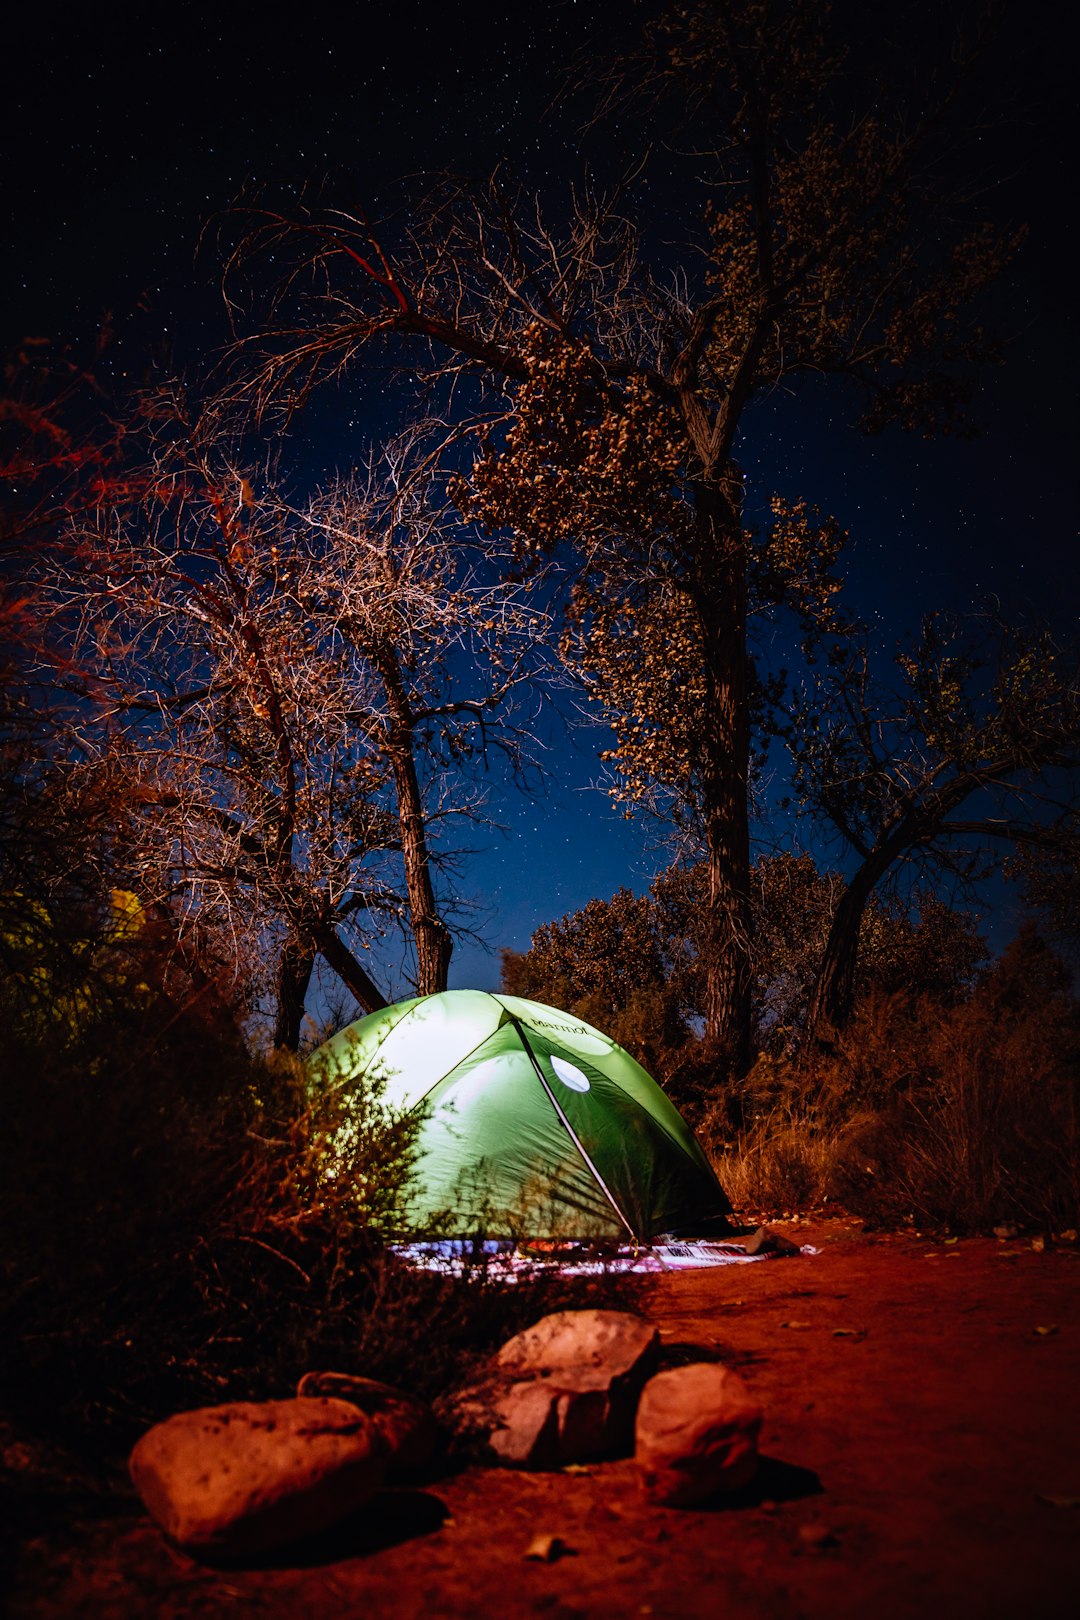 green camping tent near trees and rocks